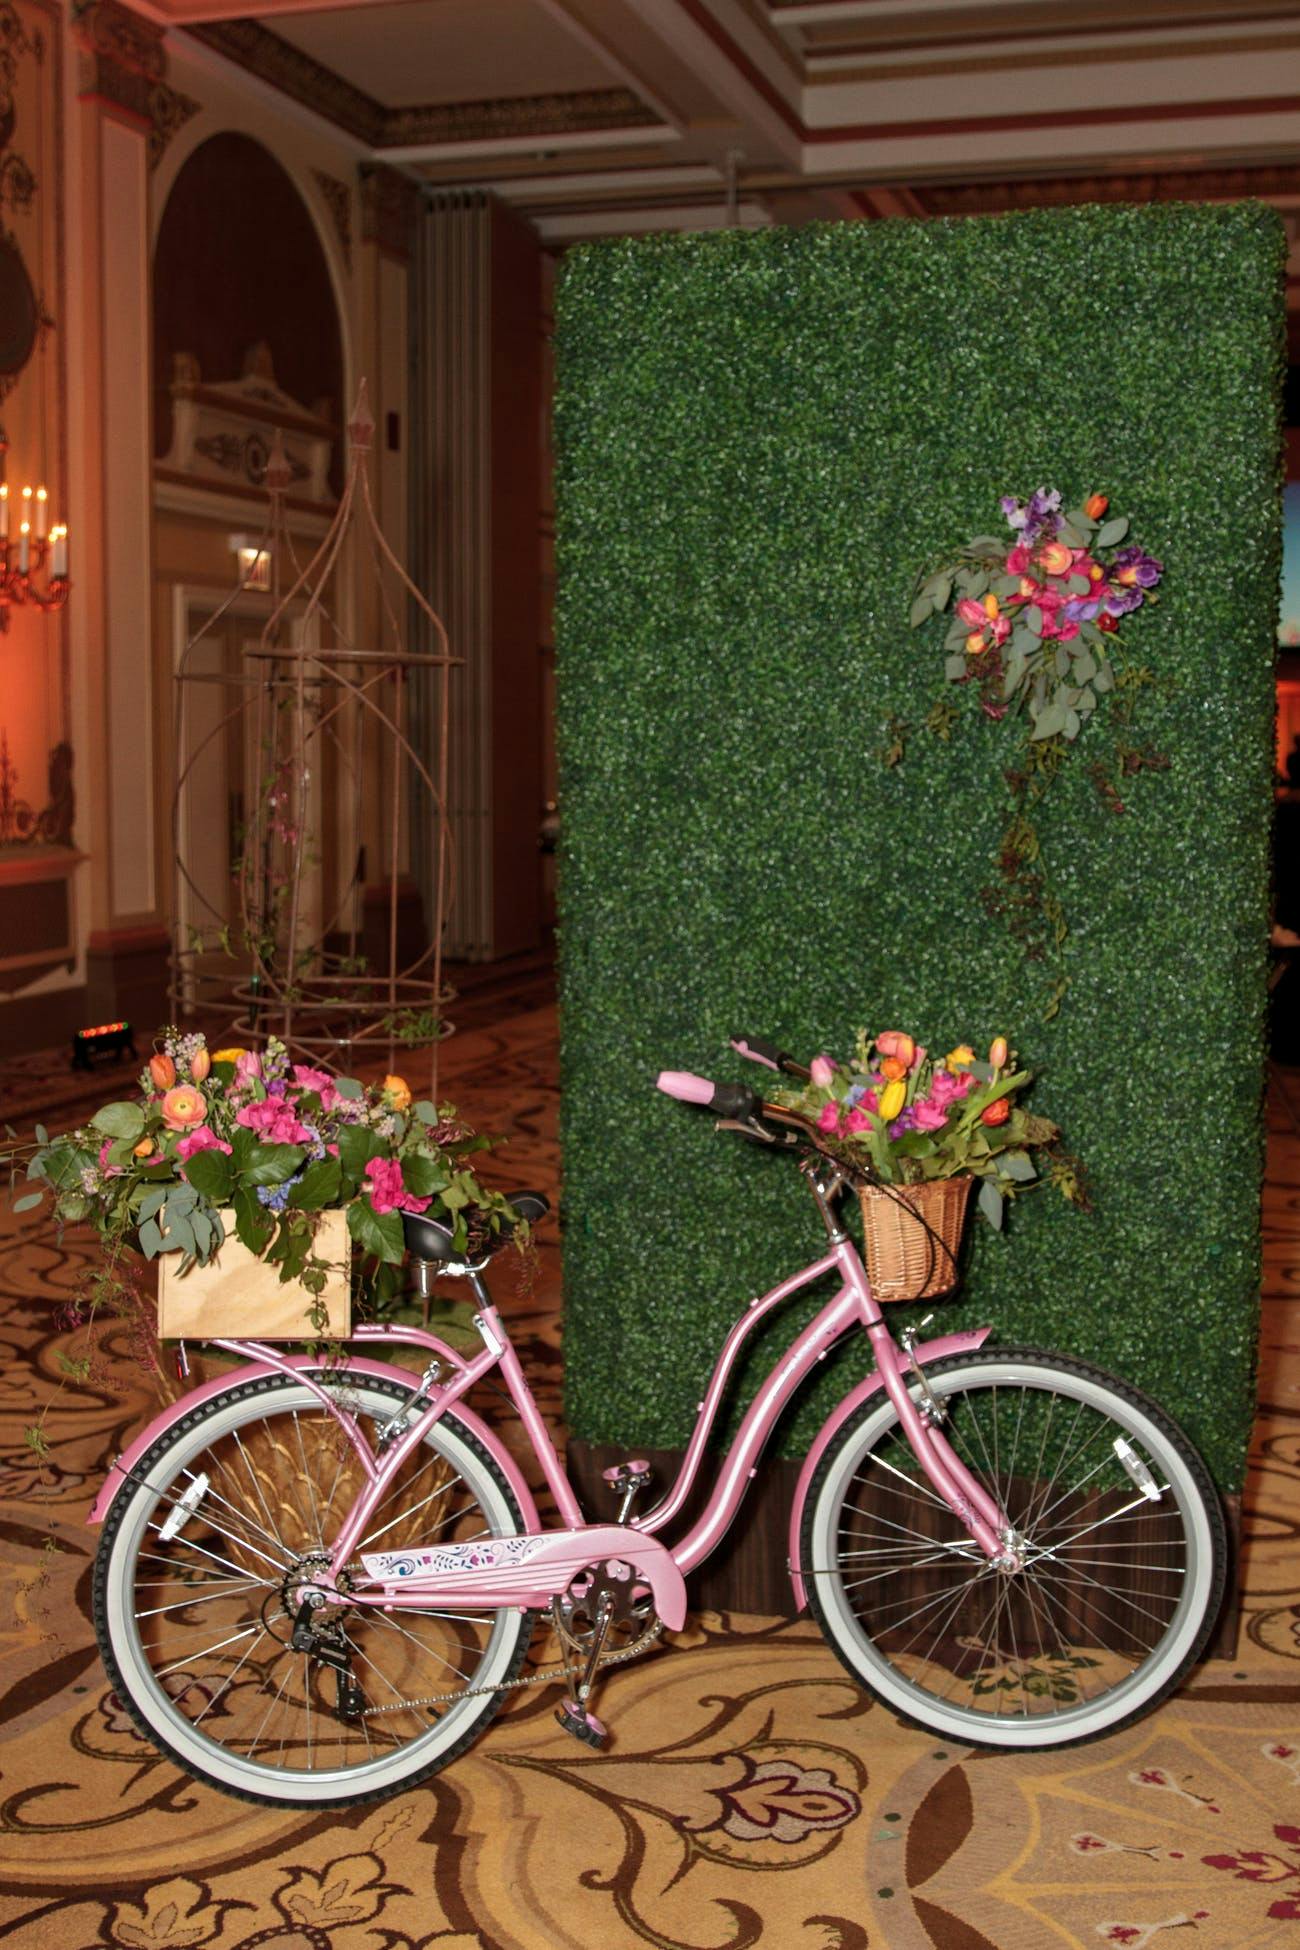 Light Pink Bike with Wood Baskets Filled with Flowers